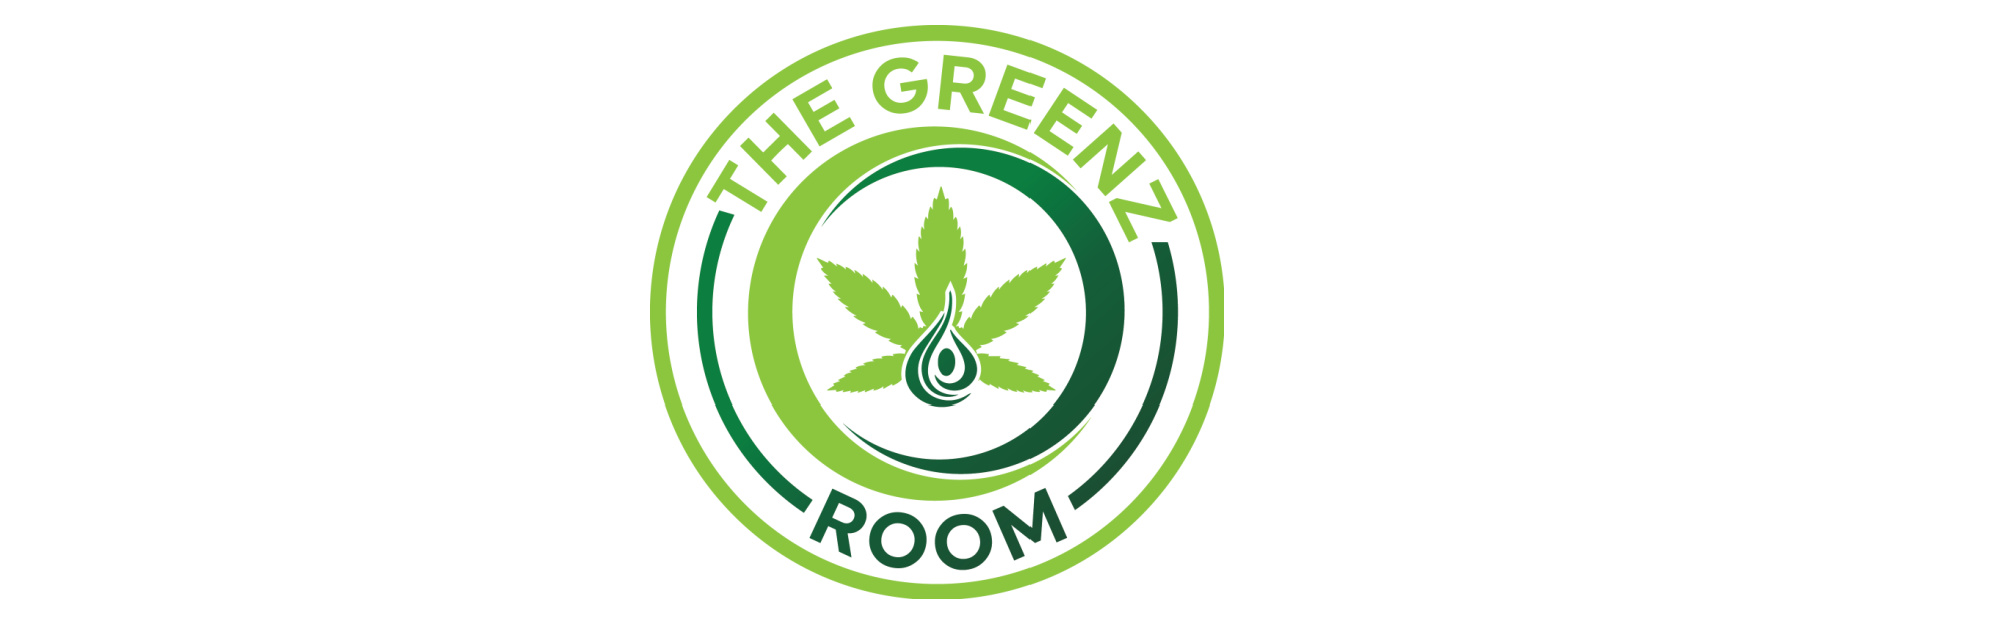 image of the greenz room in st petesburg fl